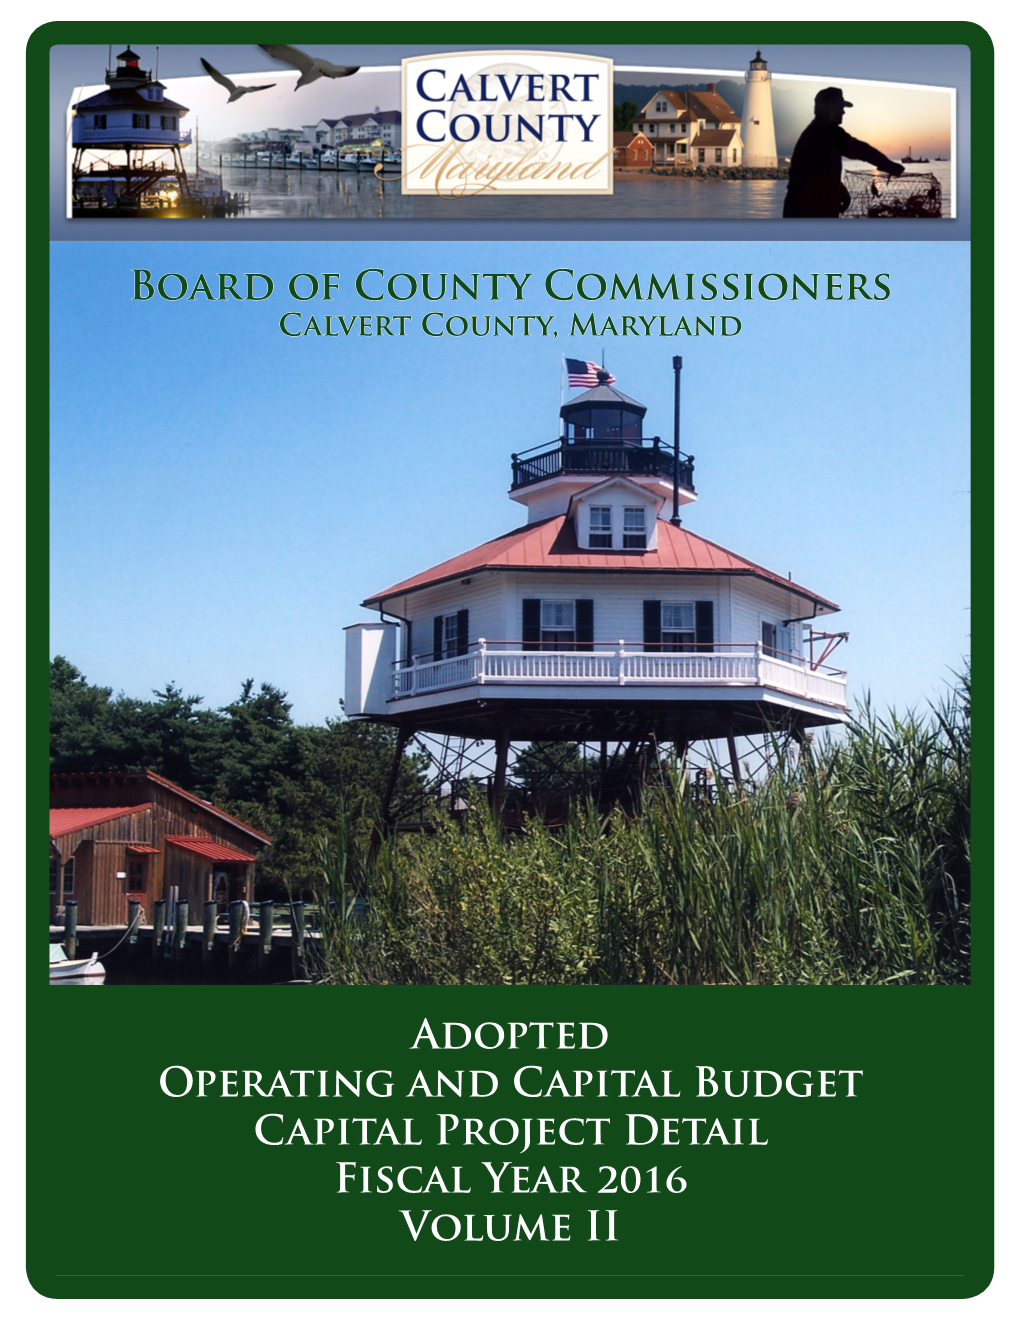 Board of County Commissioners Adopted Operating and Capital Budget Capital Project Detail Fiscal Year 2016 Volume II